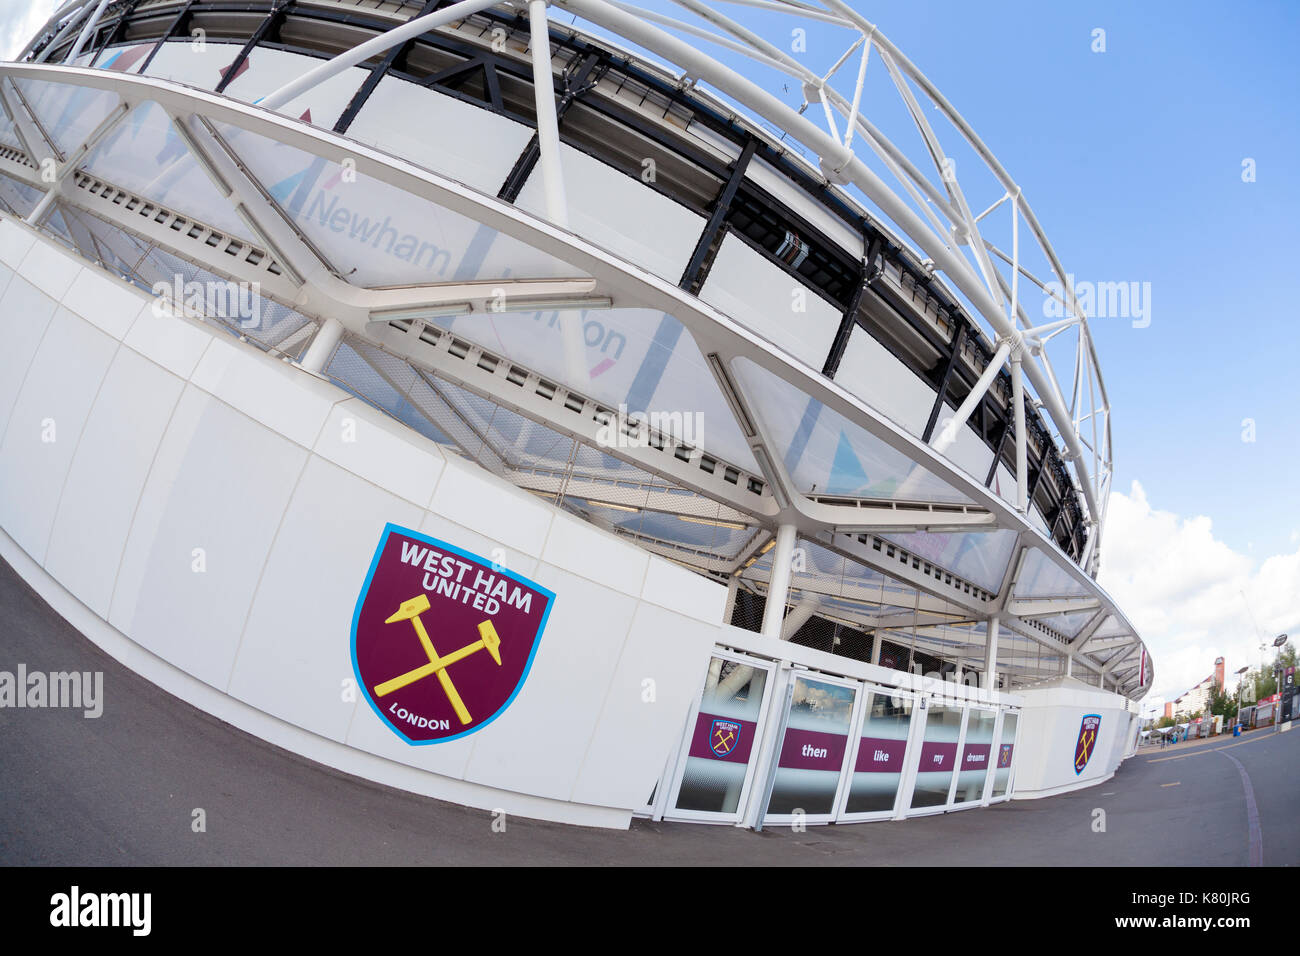 The London Stadium at the Queen Elizabeth Olympic Park branded as the home of West Ham United Football Club, London, UK. Fisheye lens. Stock Photo